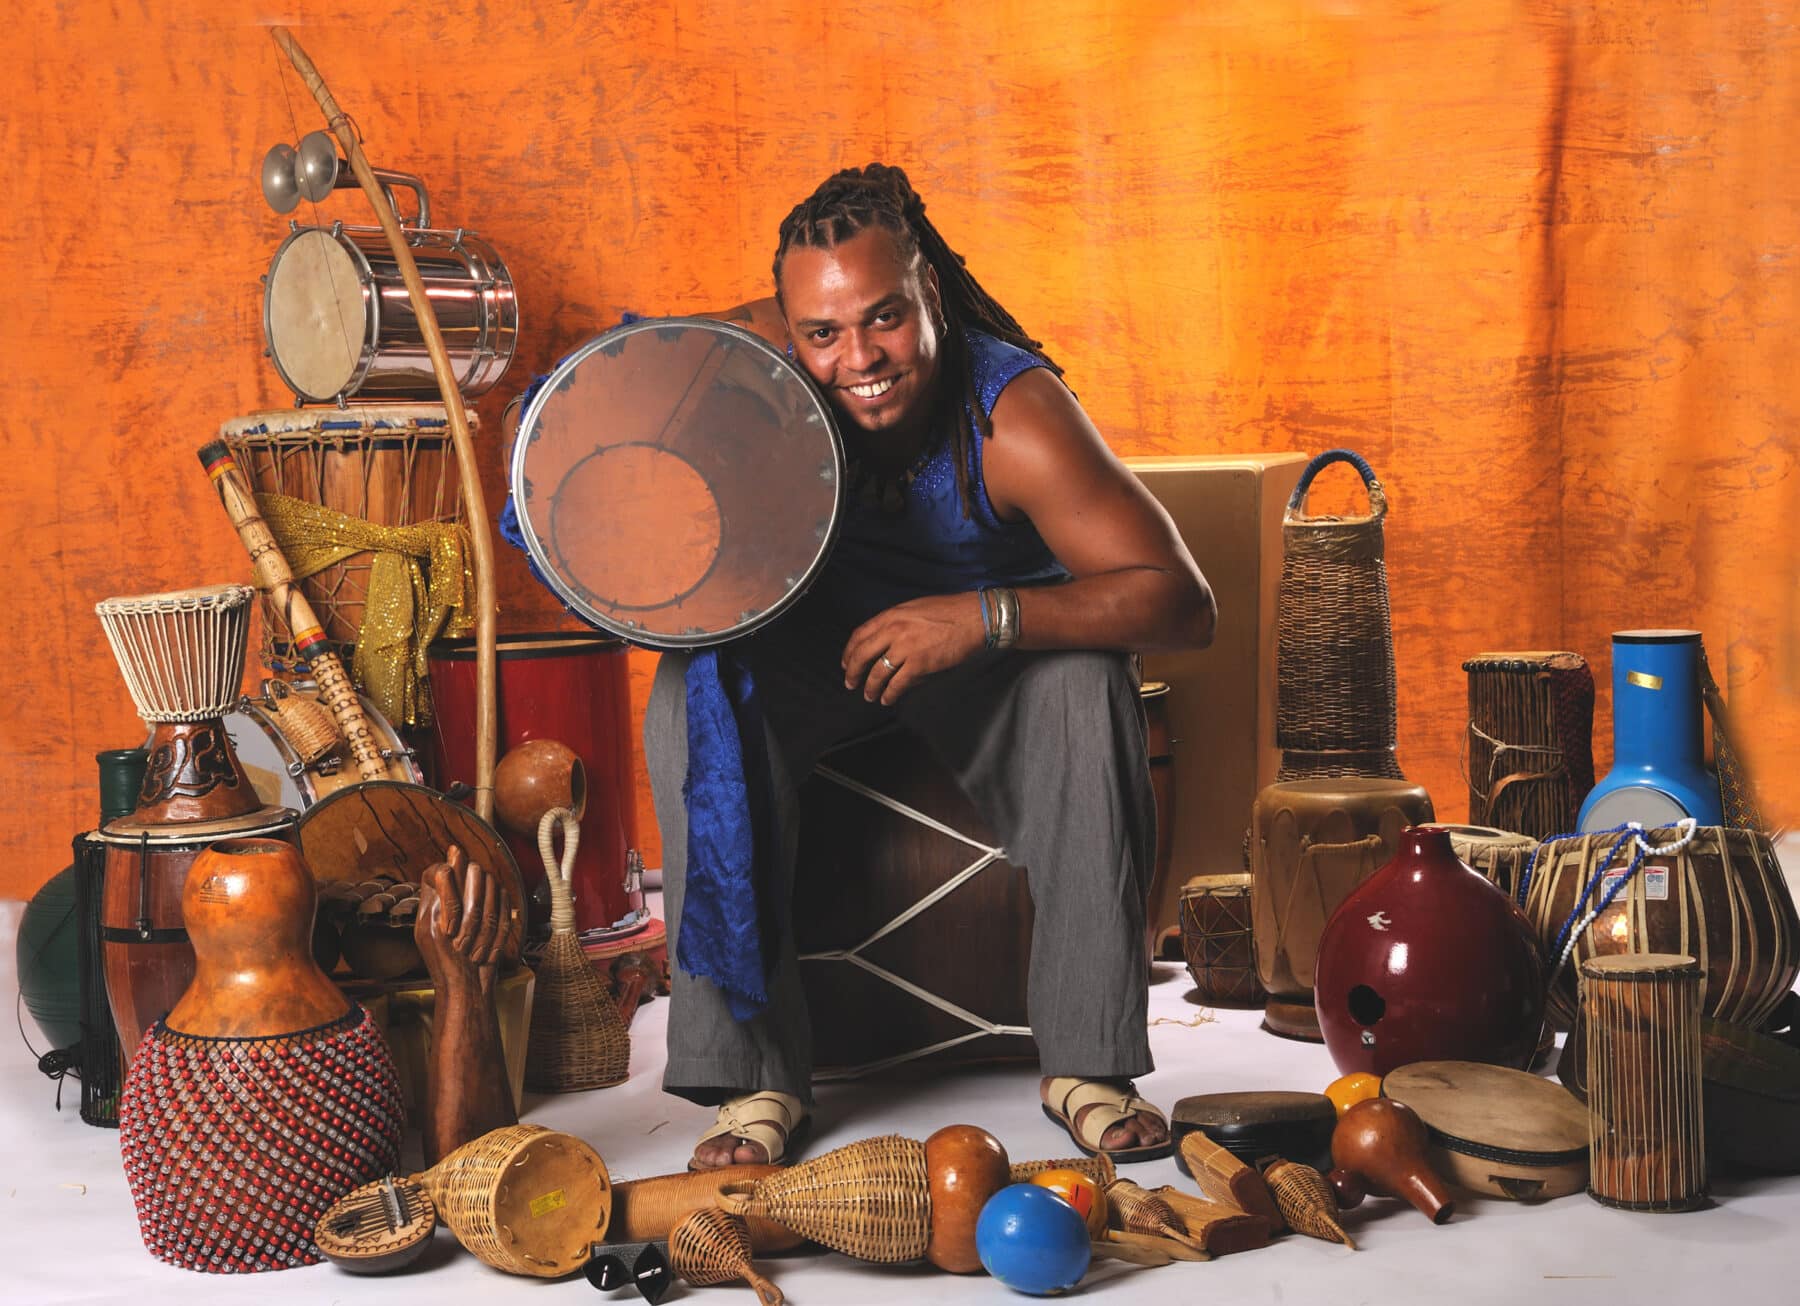 Dendê Macêdo is sitting on a drum laying on its side, holding another drum under his arm, and he is surrounded by various other instruments